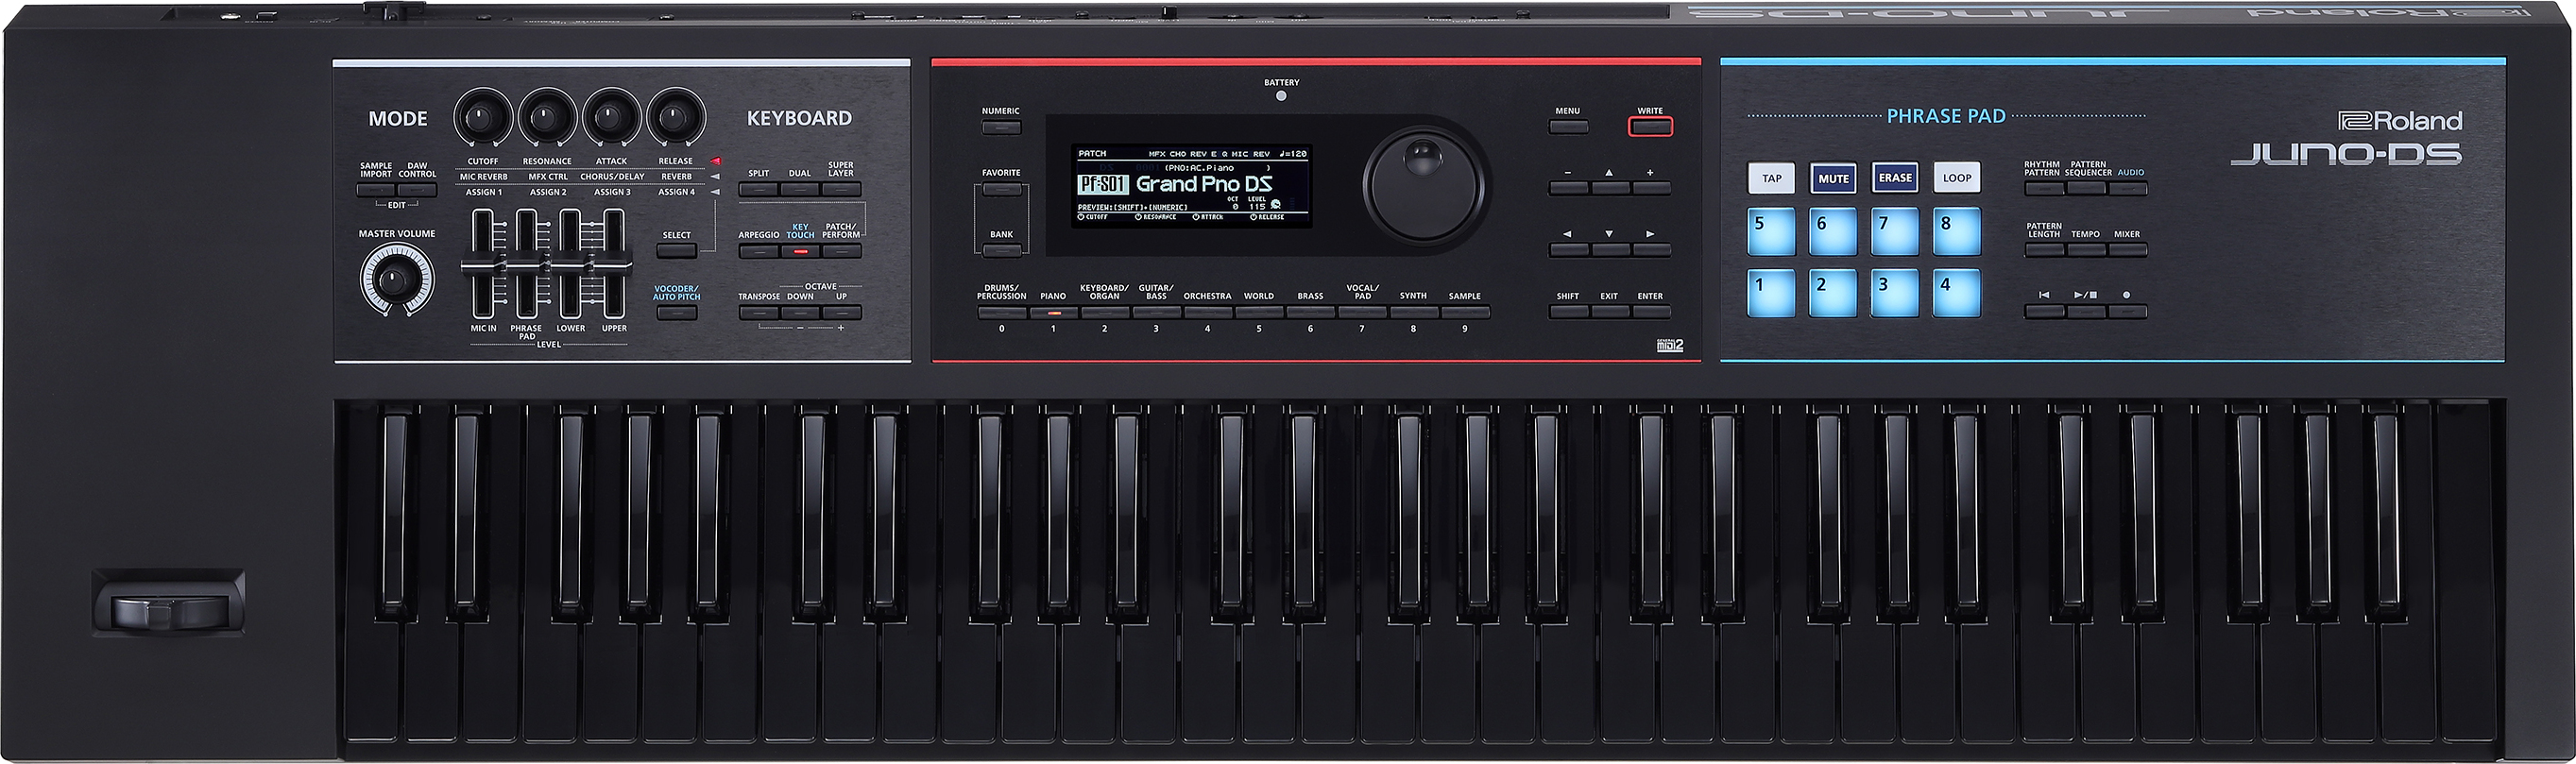 Roland Juno Ds-61b - SynthÉtiseur - Main picture